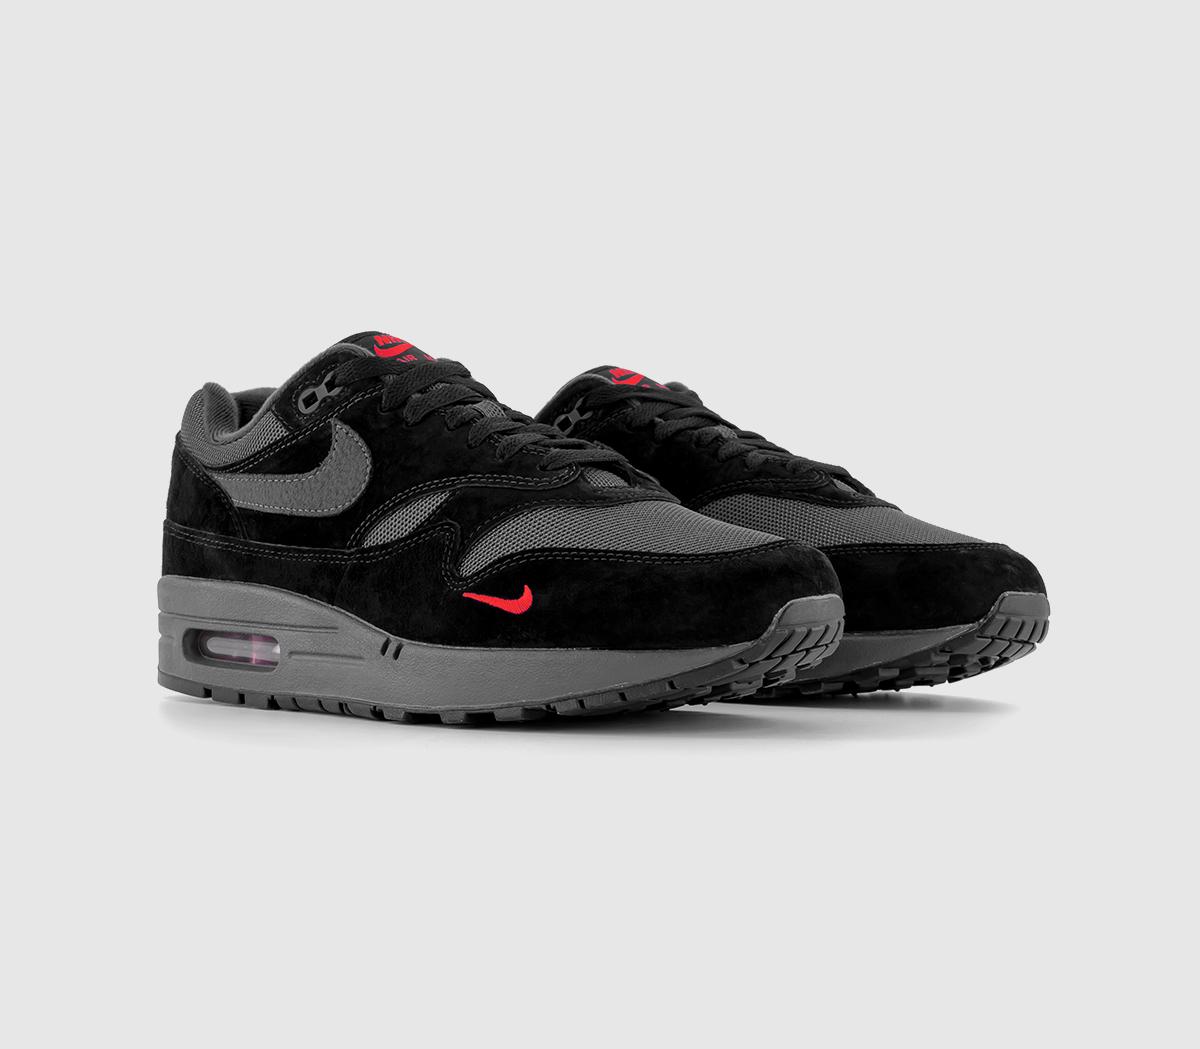 Nike Air Max 1 Trainers Black Anthracite University Red, 11